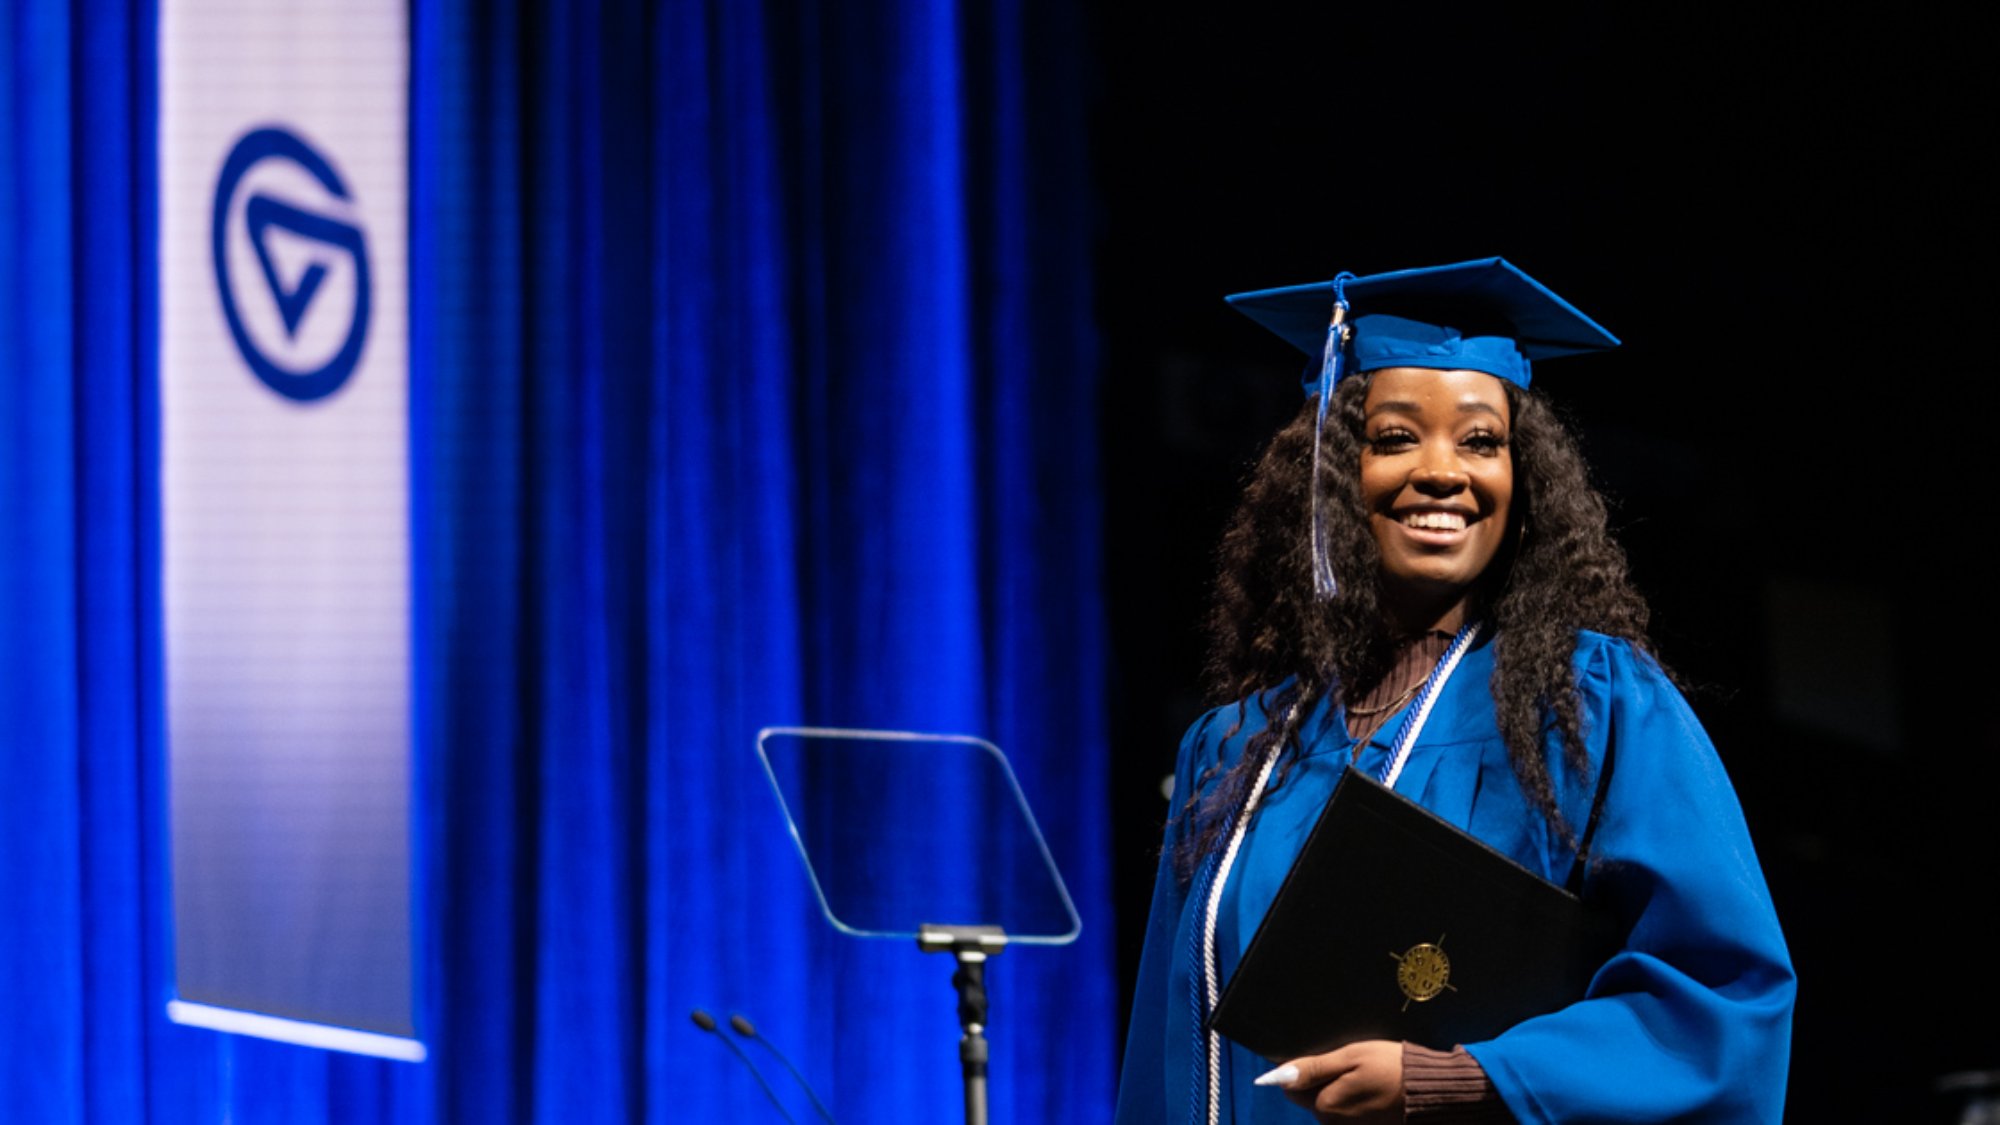 GVSU Fall class of 2022 honored in Commencement ceremony at Van Andel